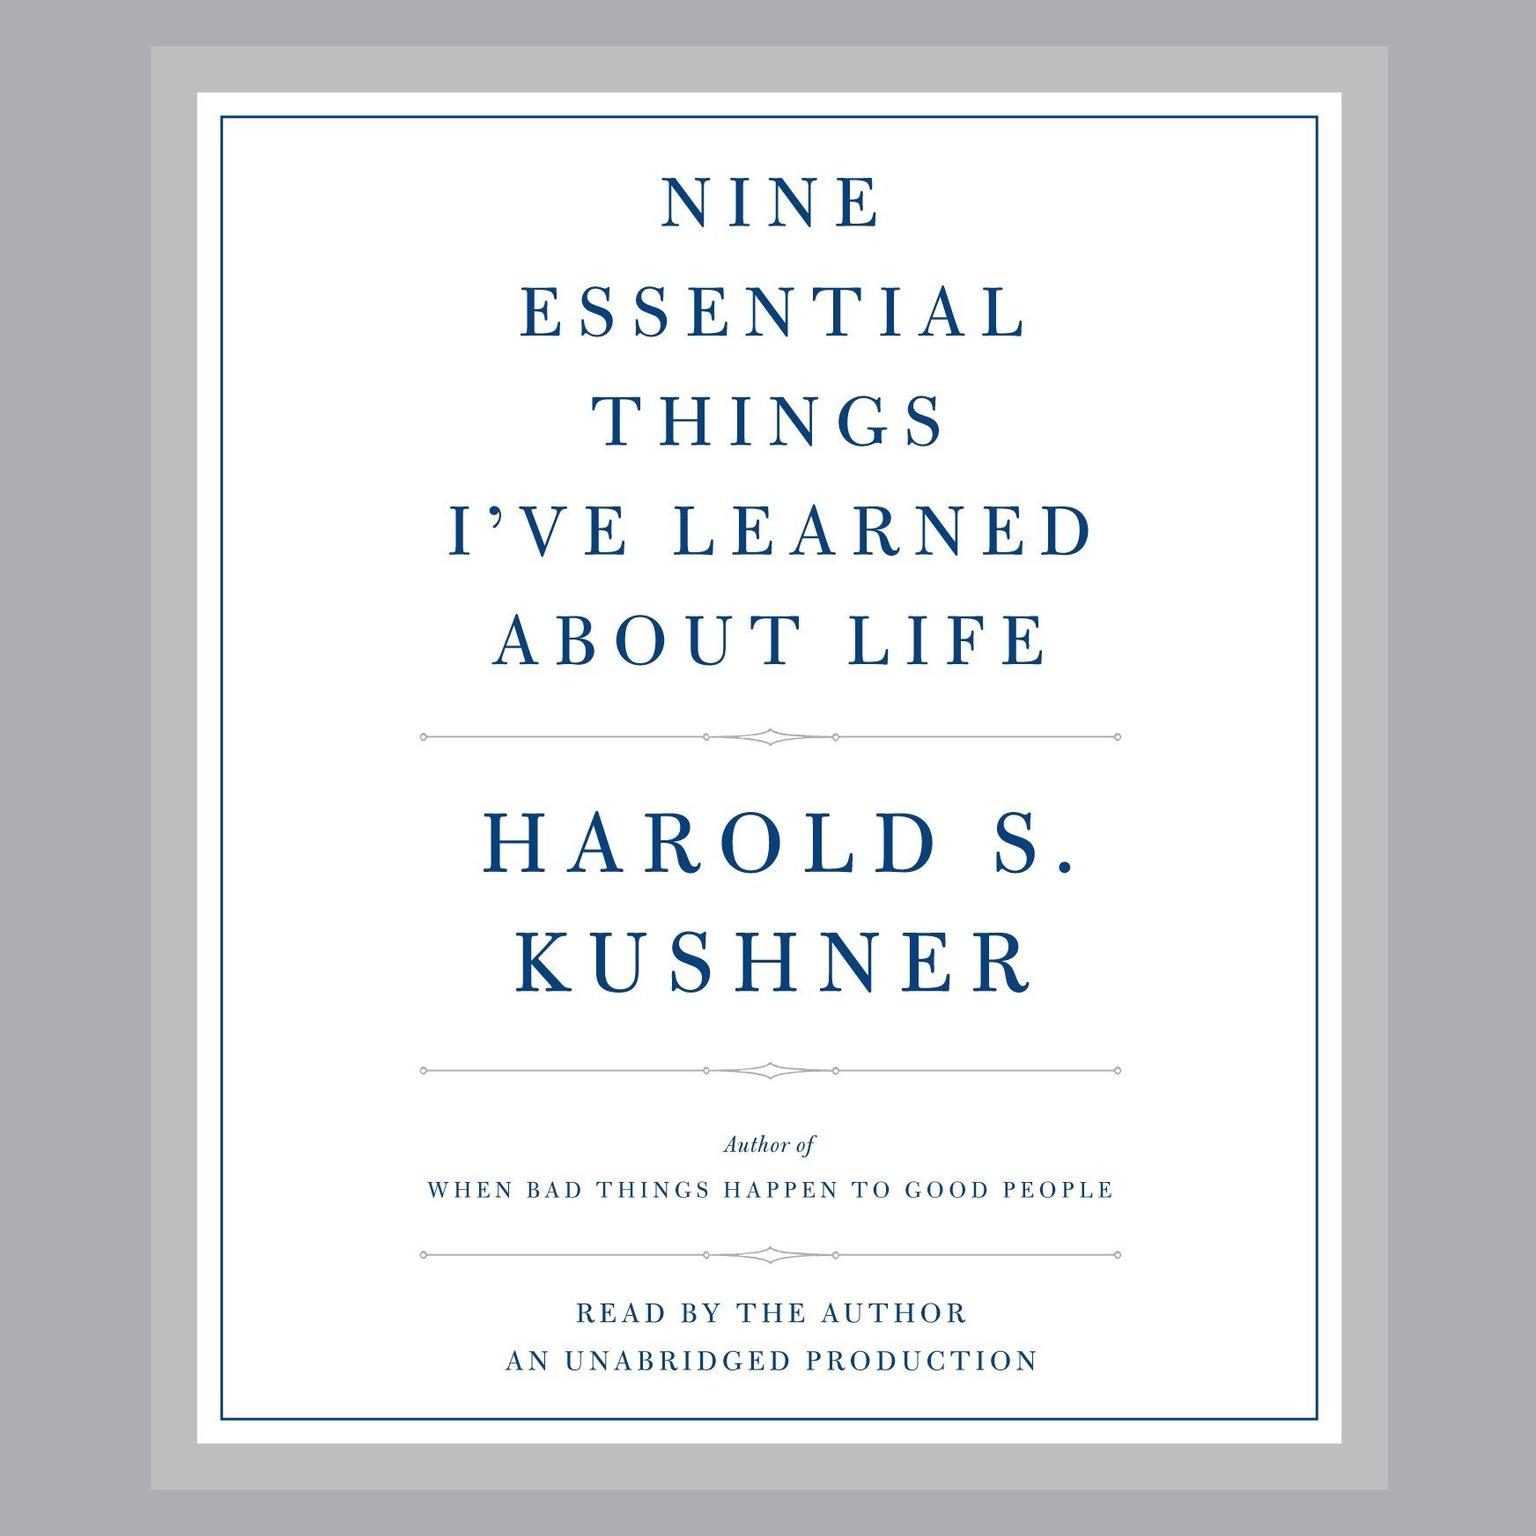 Nine Essential Things Ive Learned About Life Audiobook, by Harold S. Kushner